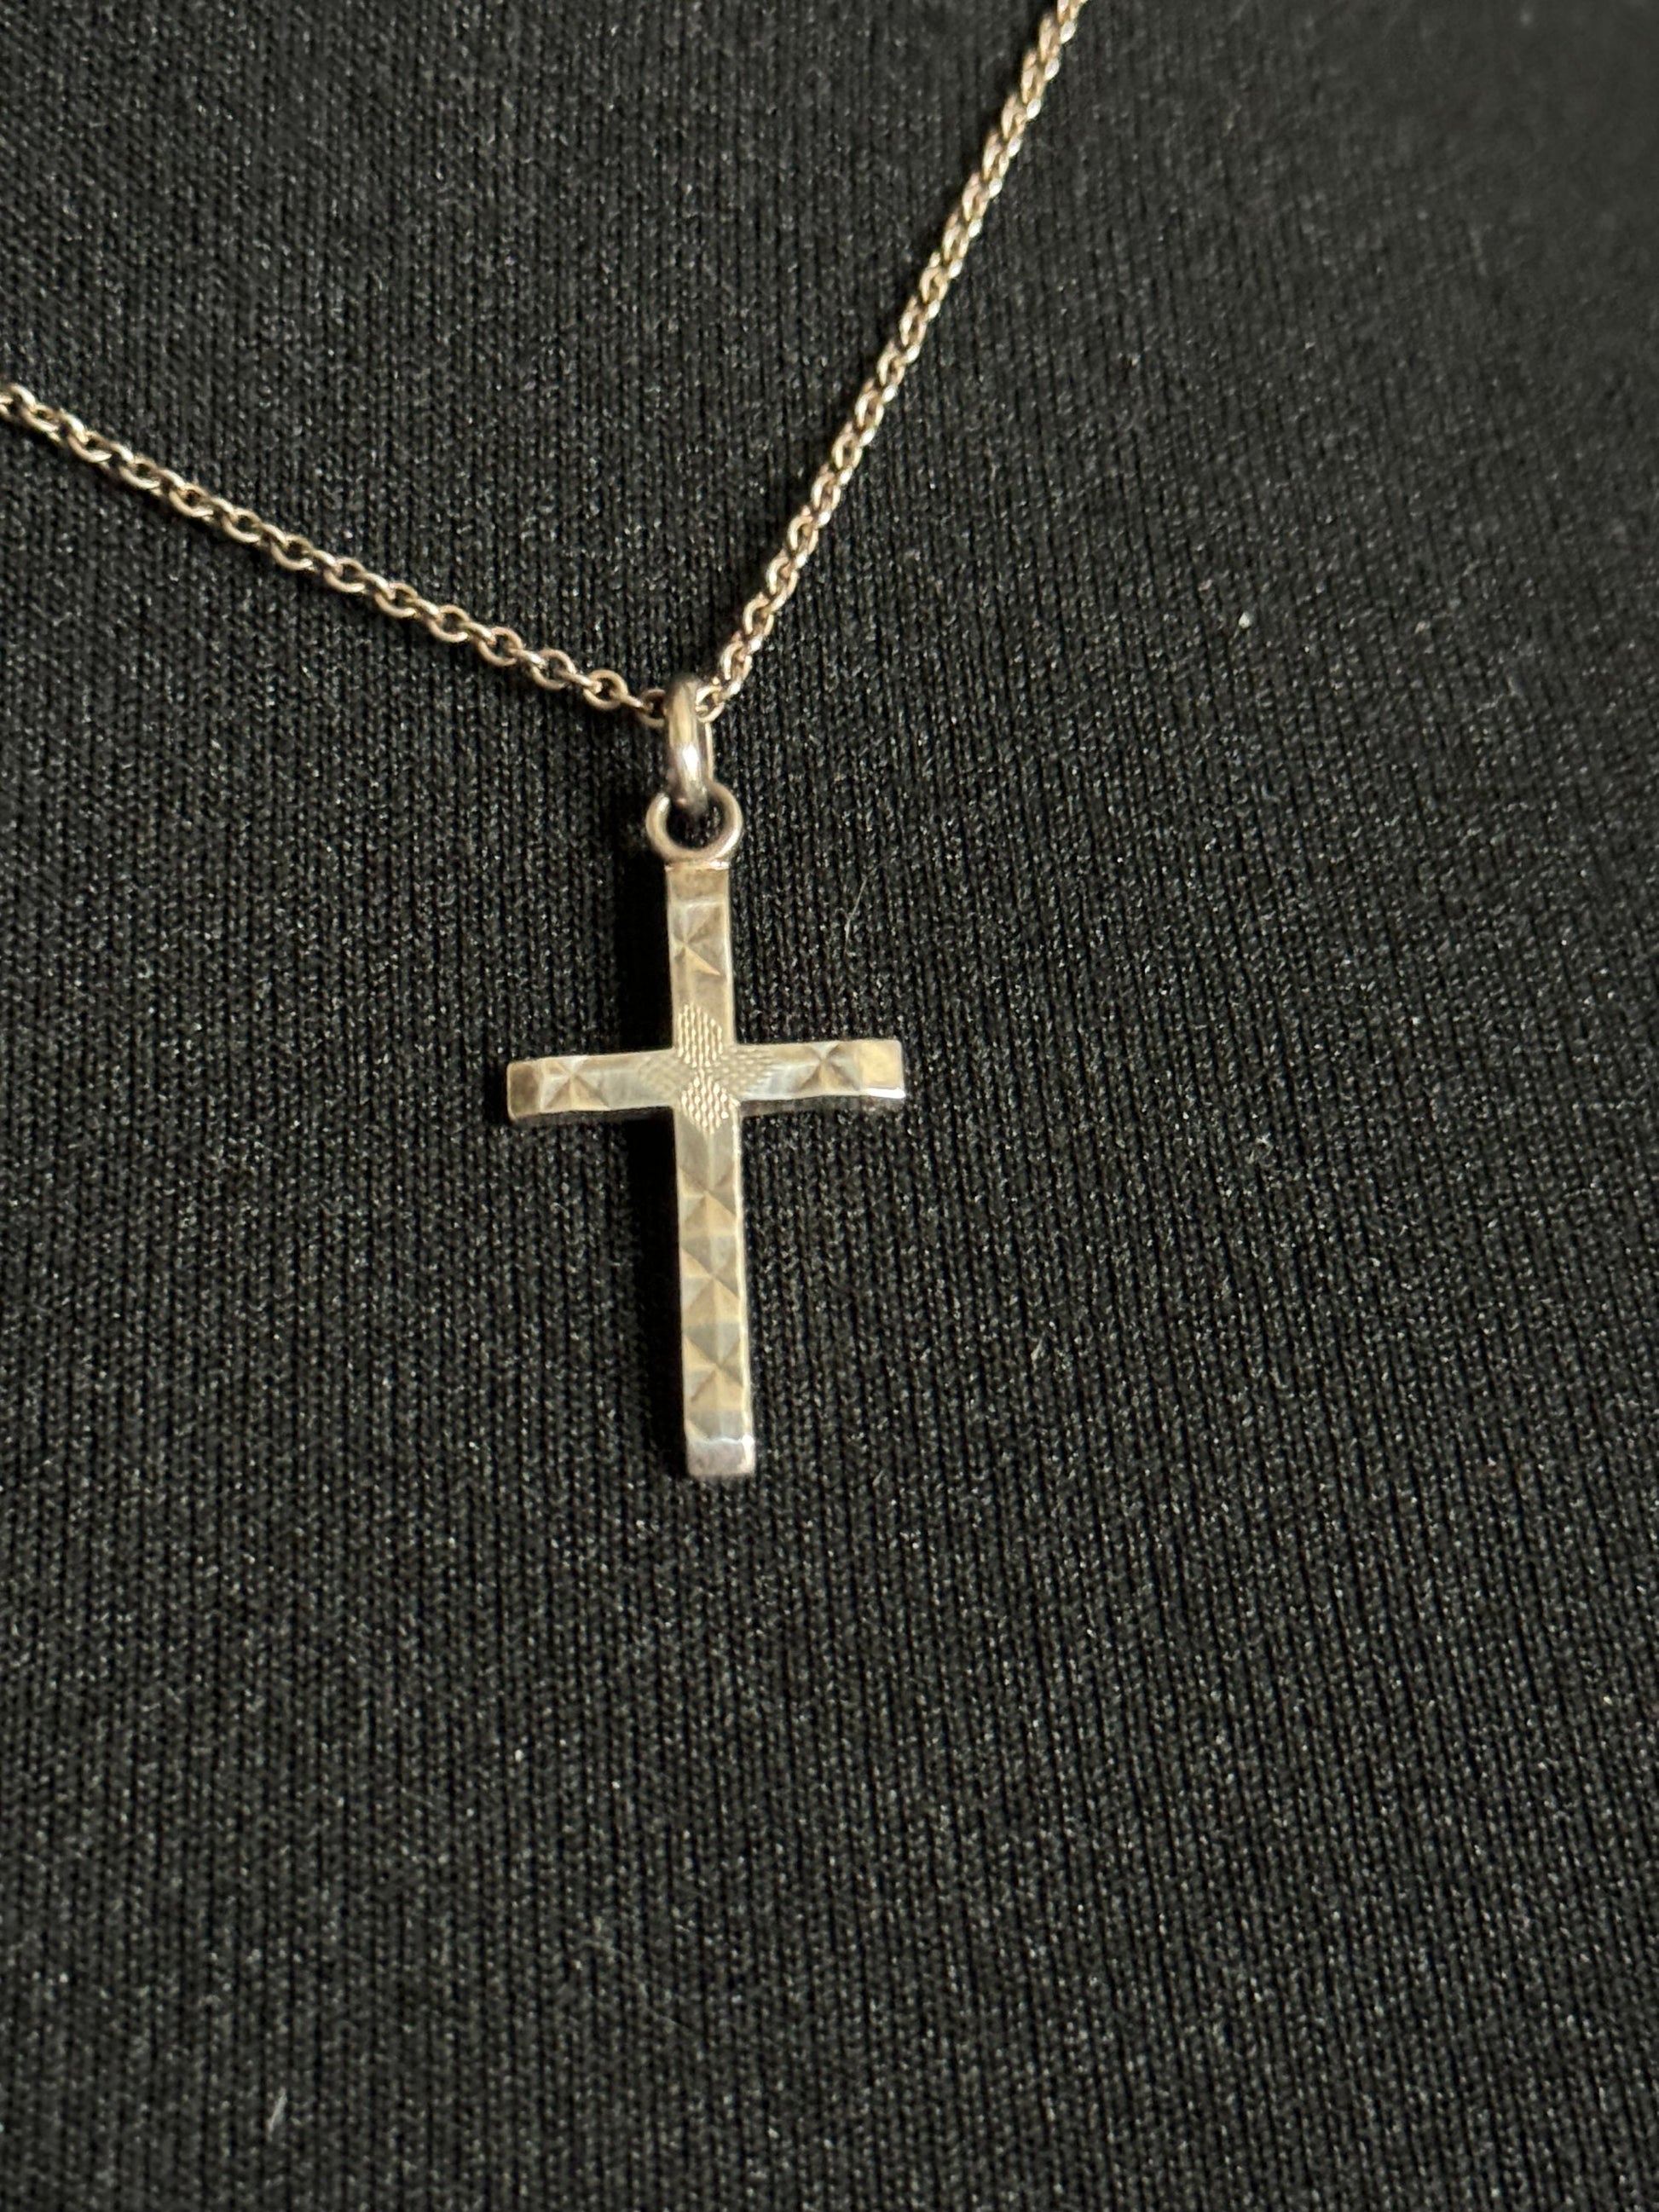 925 Sterling silver plain religious cross pendant necklace on chain